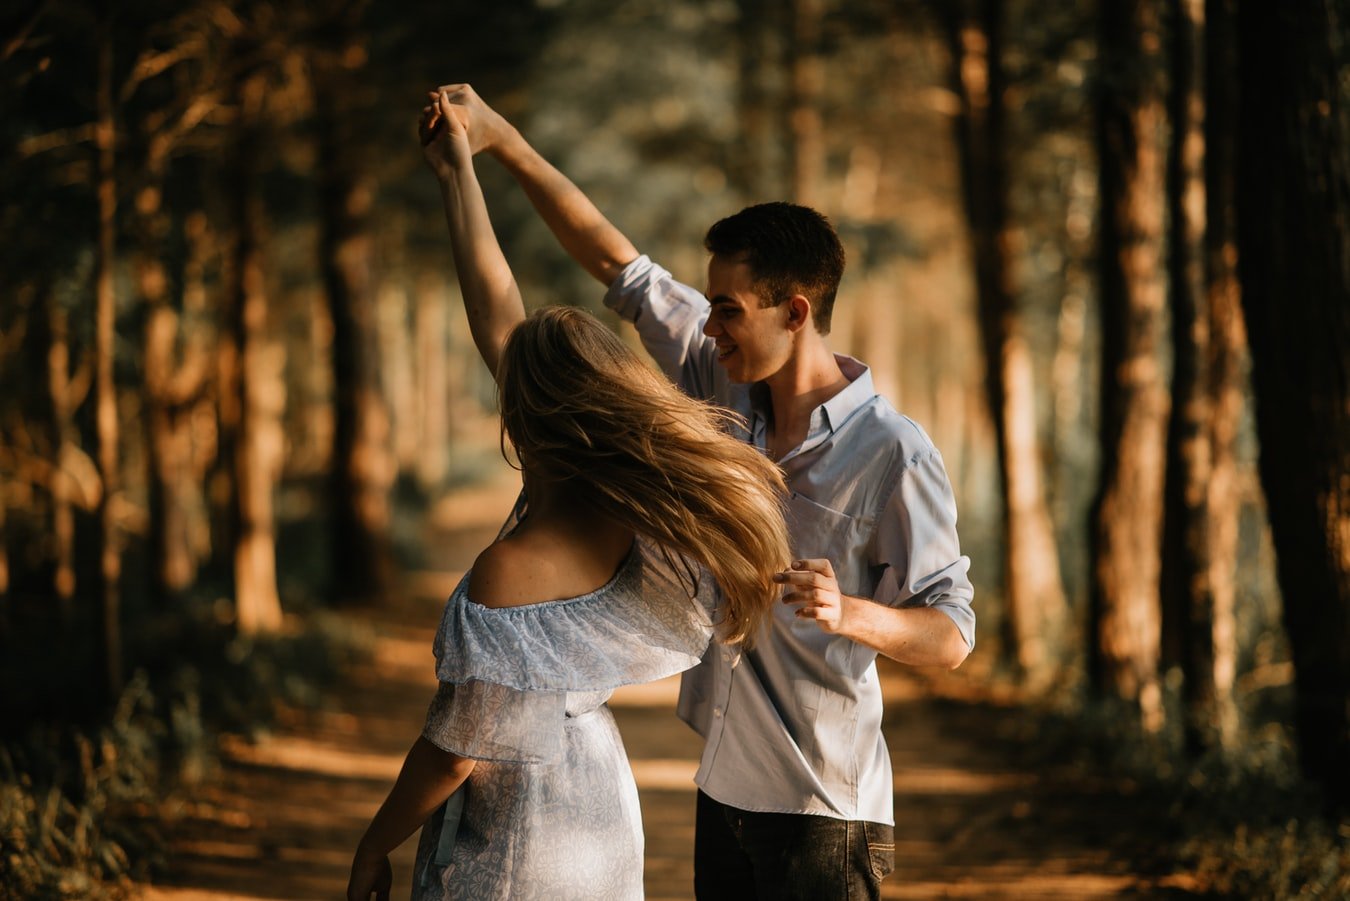 Young couple falling in love | Source: Unsplash